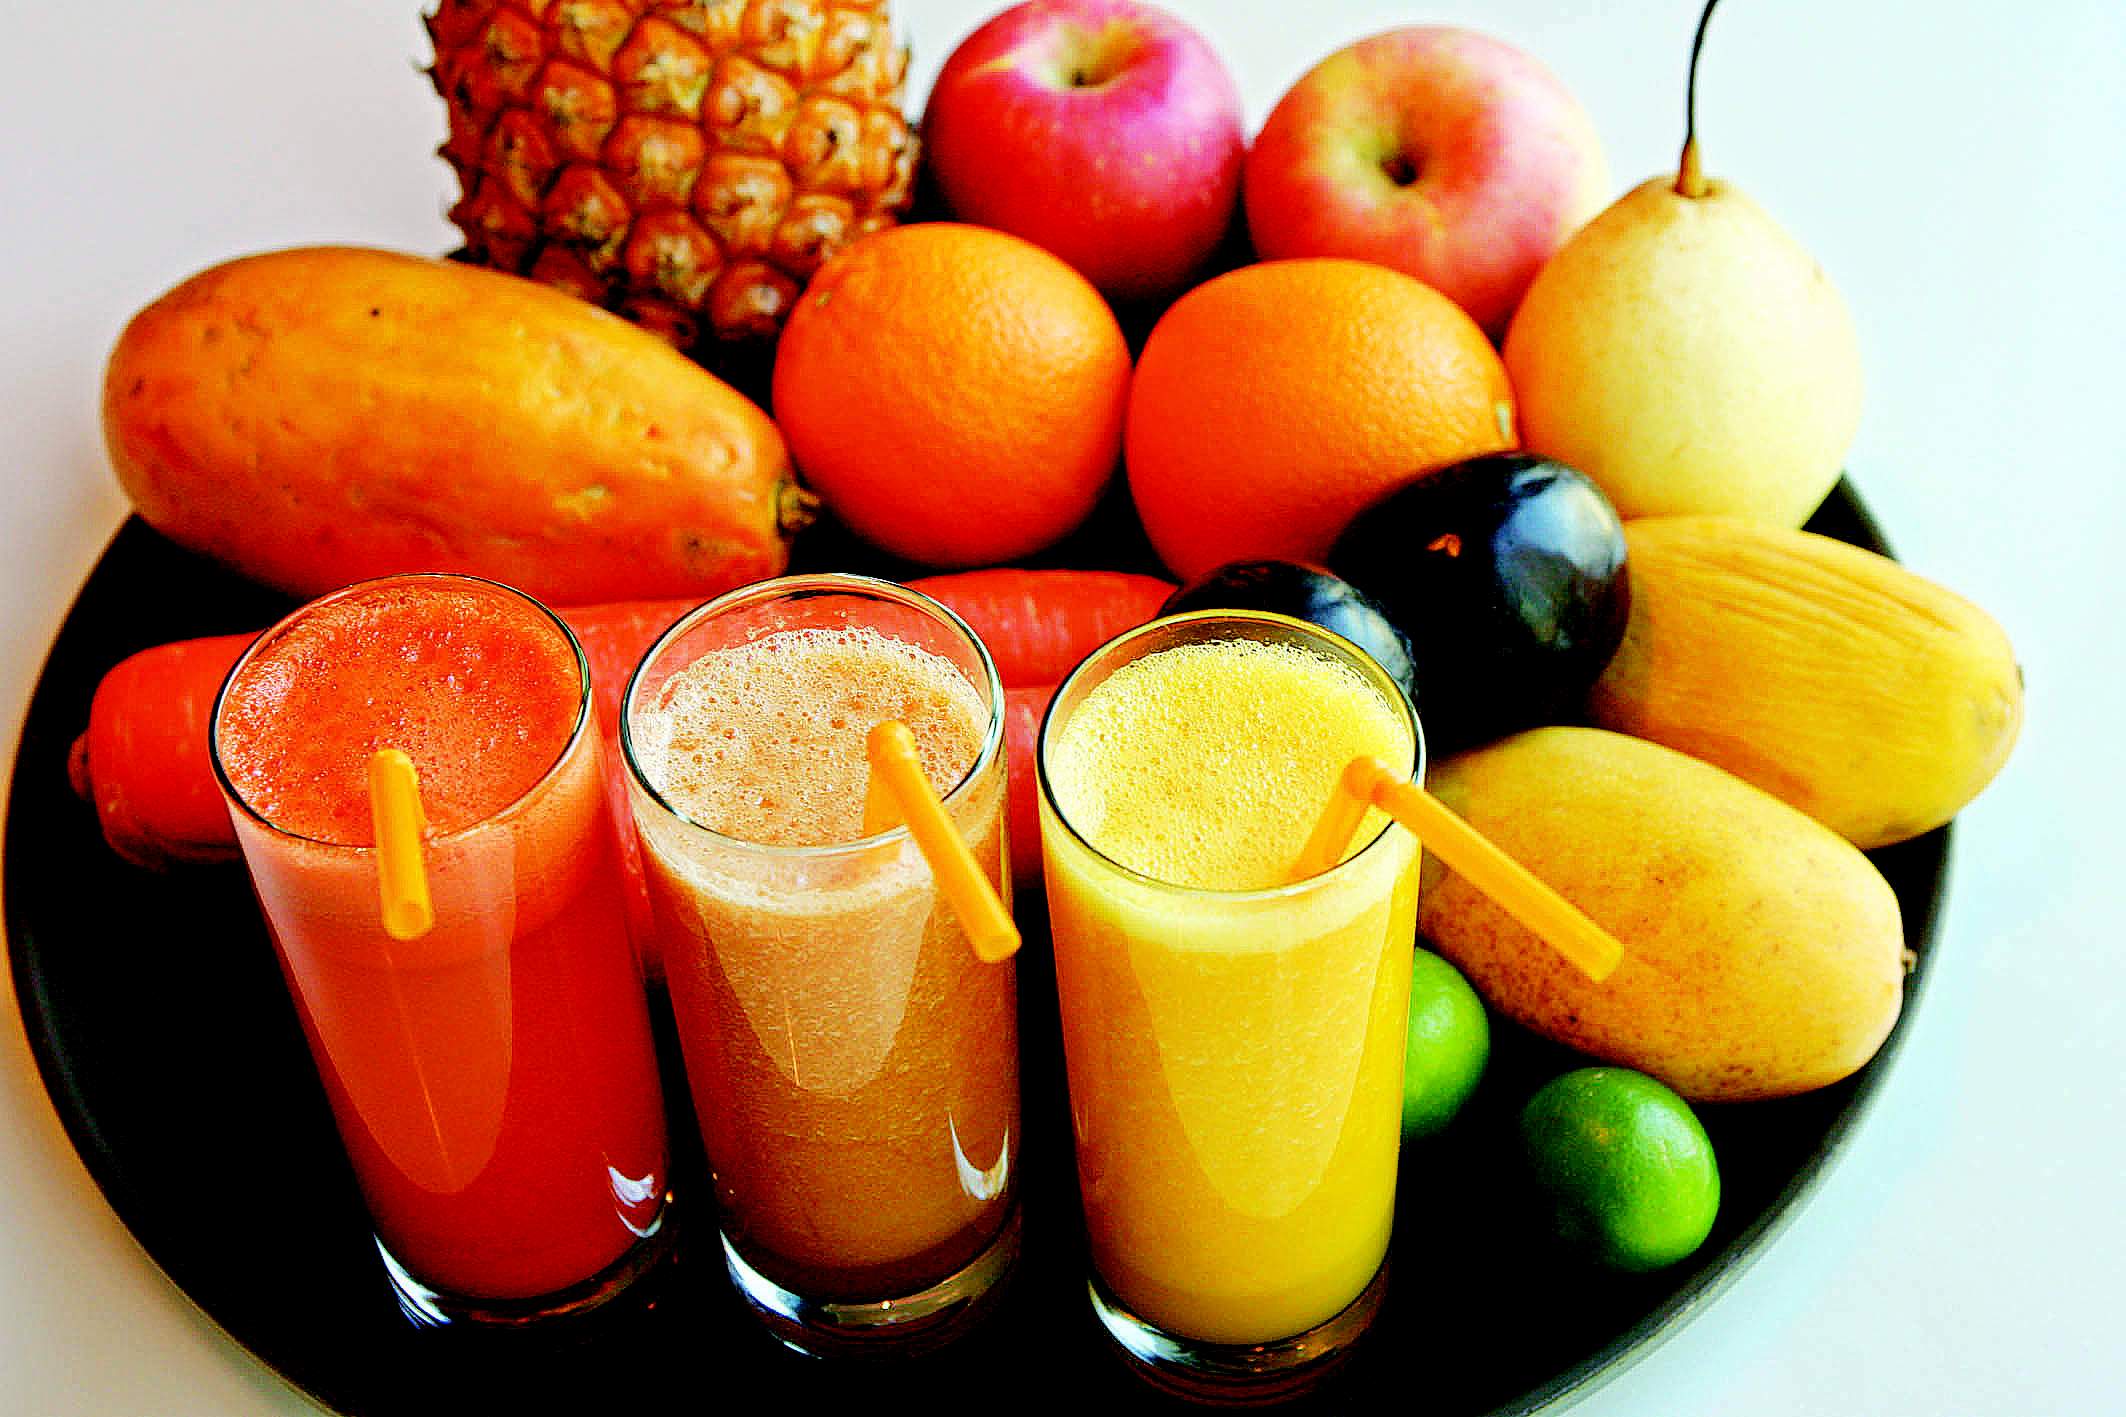 Juices or Smoothies: Which is healthier?